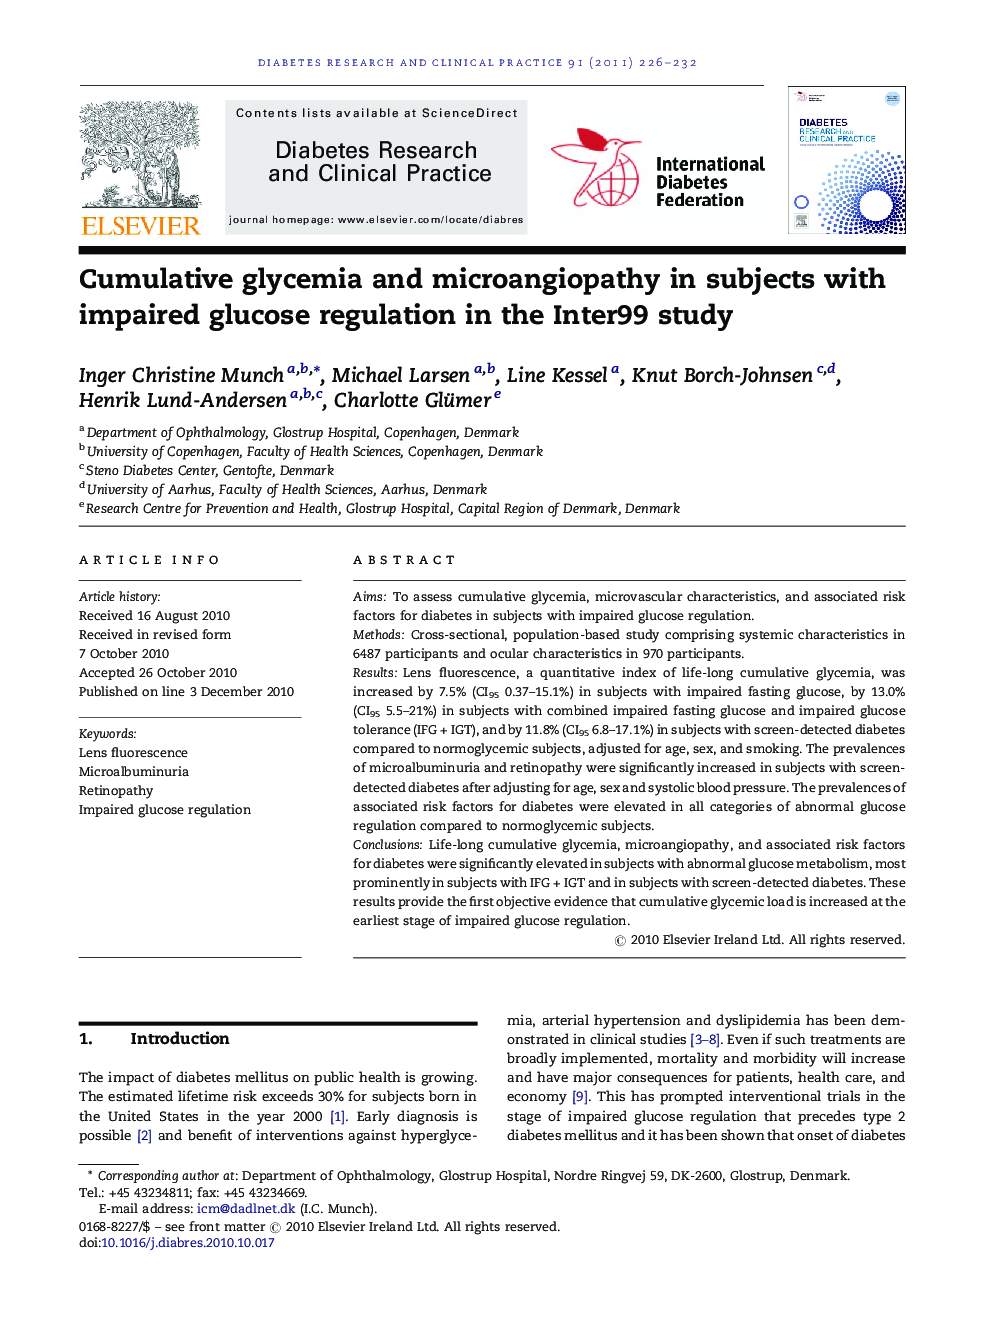 Cumulative glycemia and microangiopathy in subjects with impaired glucose regulation in the Inter99 study